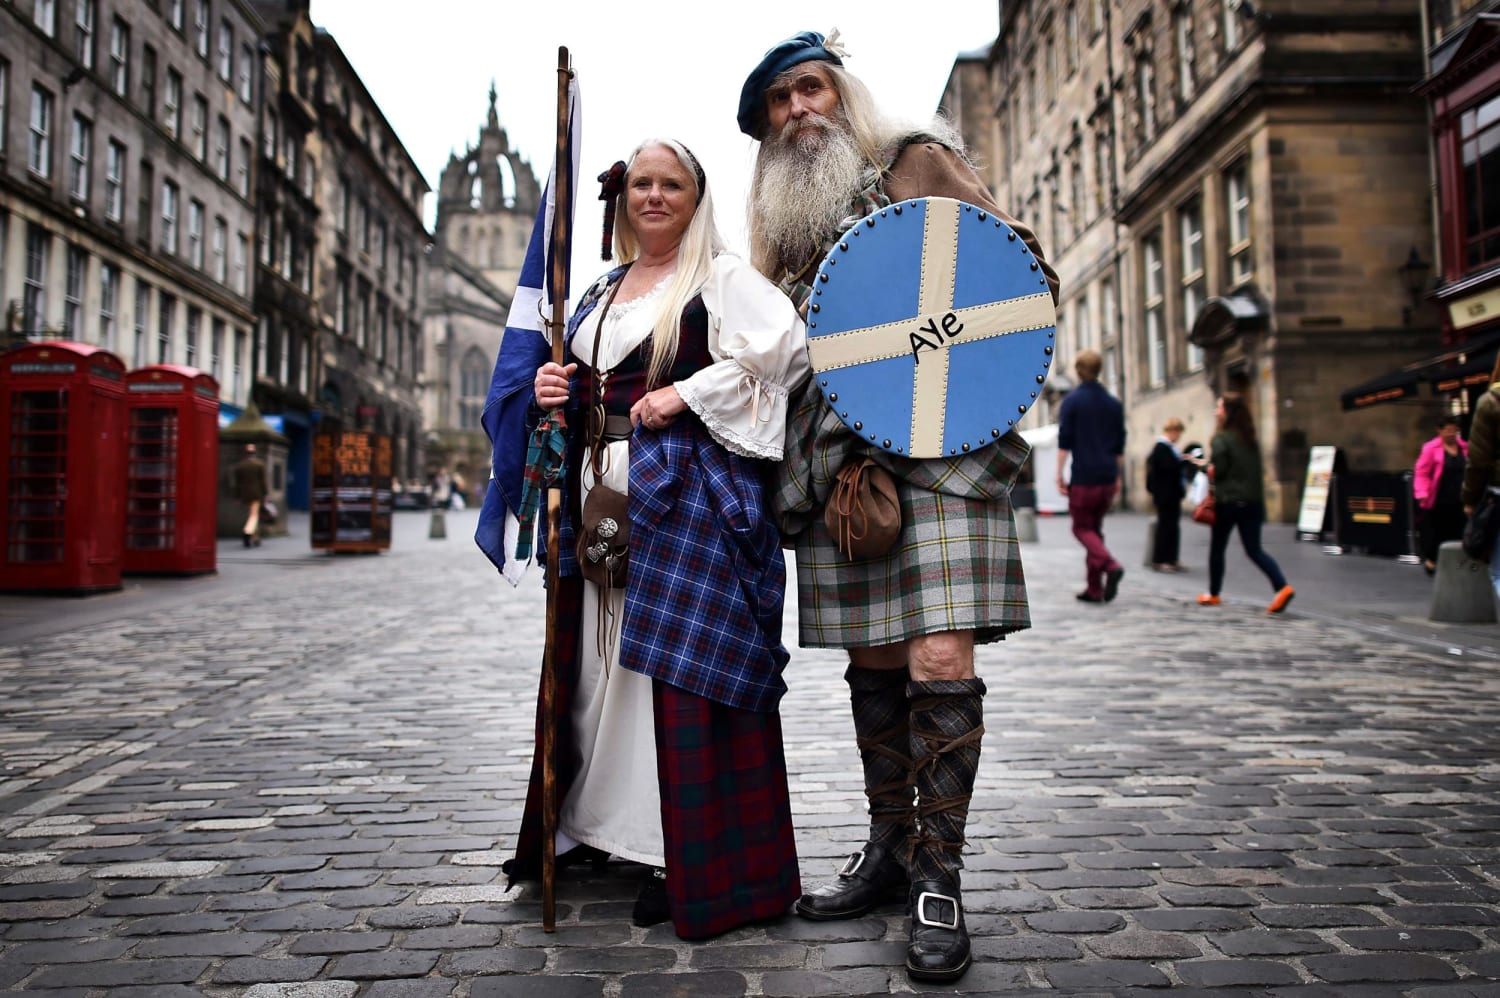 A referendum on Scottish independence could break up the 307-year-old union...